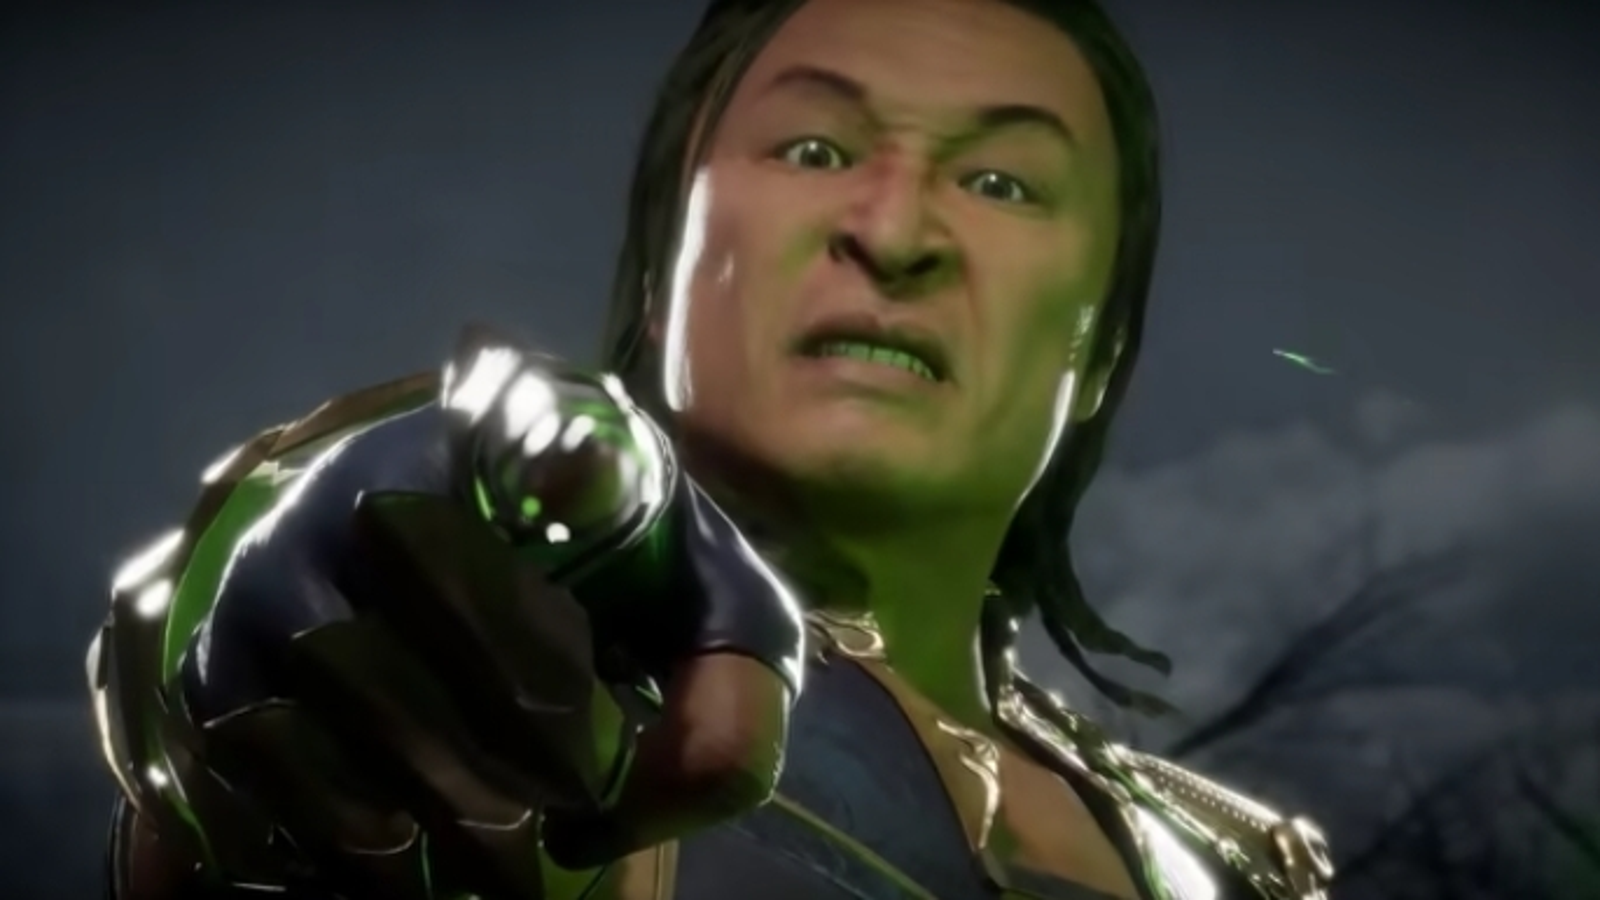 MK11 Shang Tsung Gameplay, It has begun! #MK11 #ShangTsung heals with his  Special 2 Attack, morphs into his opponents to use their Specials against  them, and can passively generate